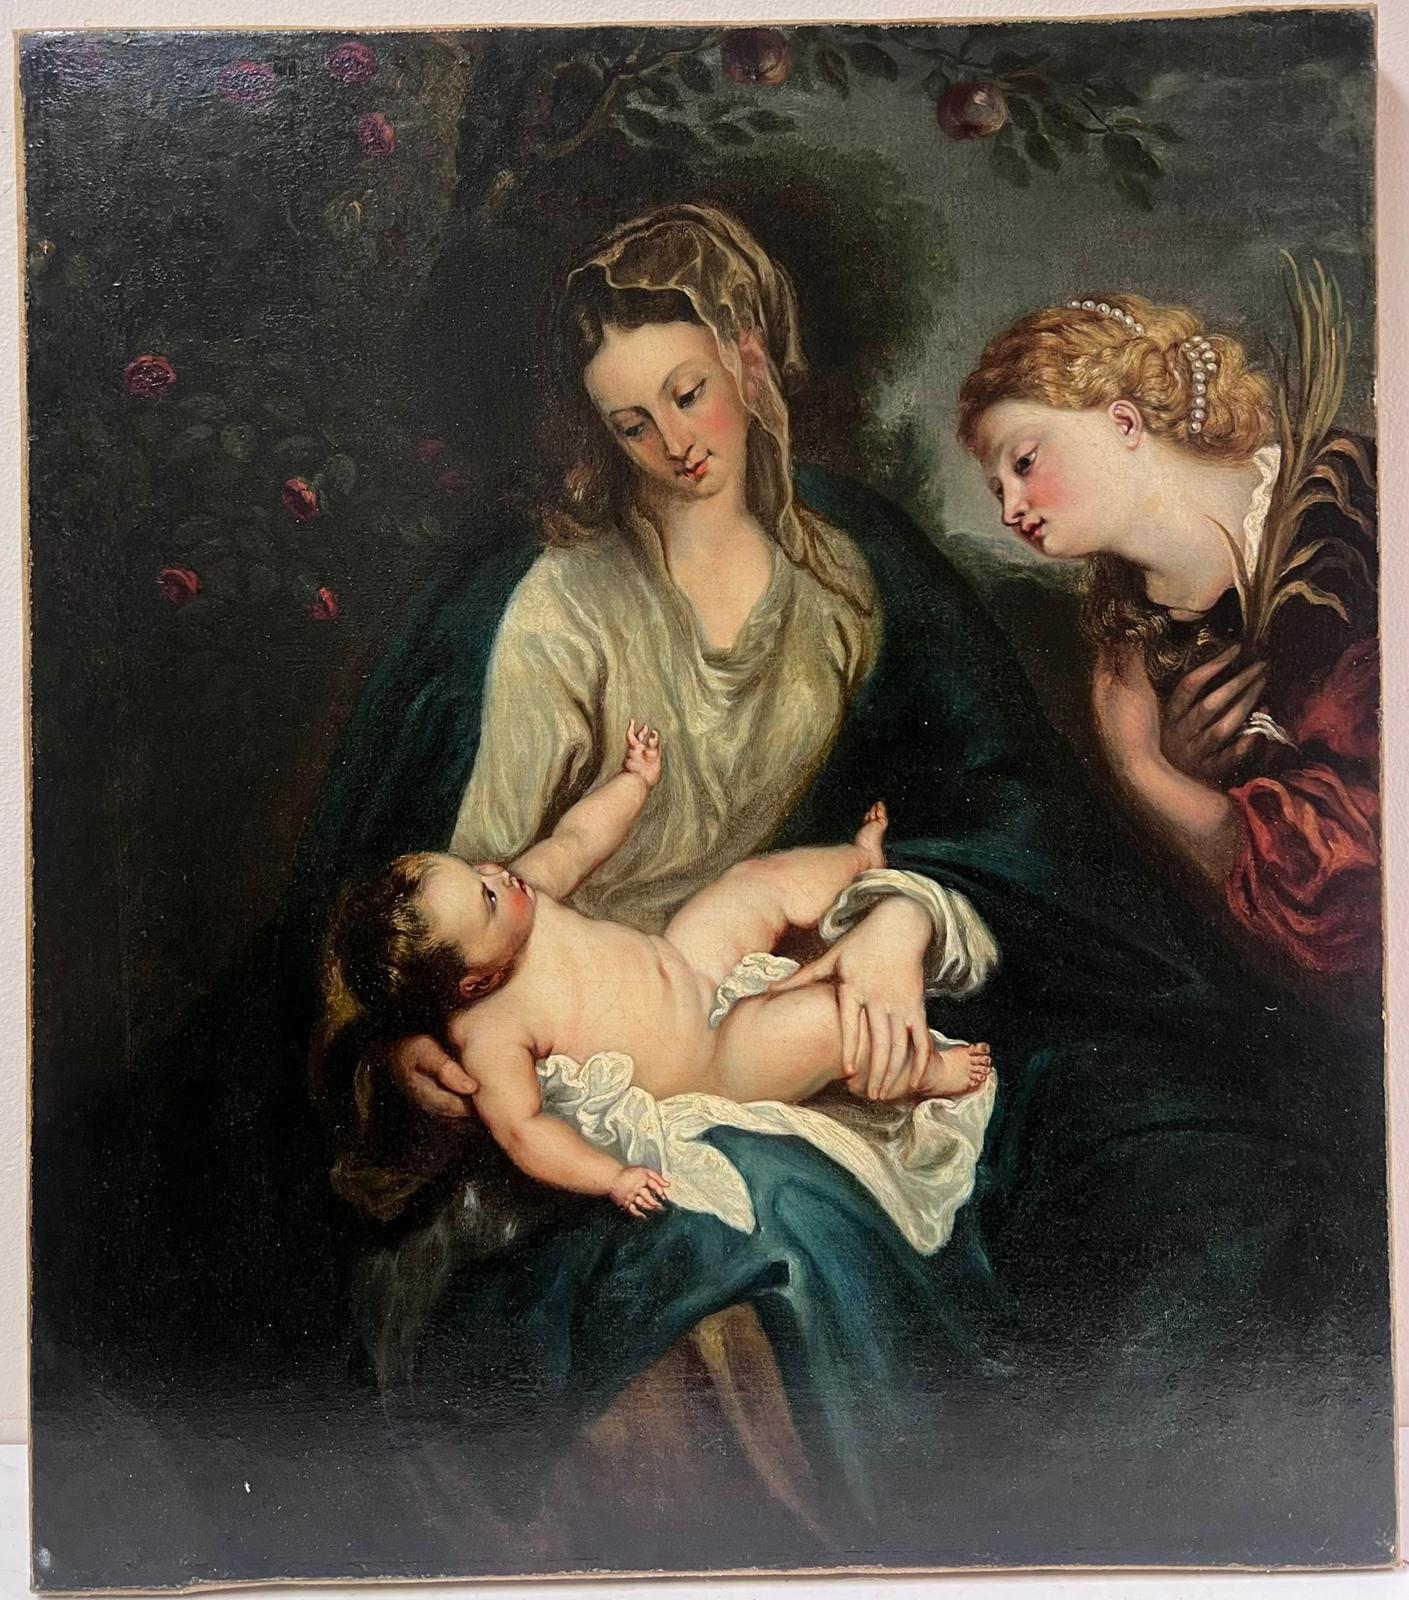 Mother & Child
British artist, late 18th century
after the painting by Sir Anthony van Dyke
oil on canvas, unframed
canvas : 20 x 18 inches
provenance: private collection, Berkshire, England
condition: very good and sound condition 